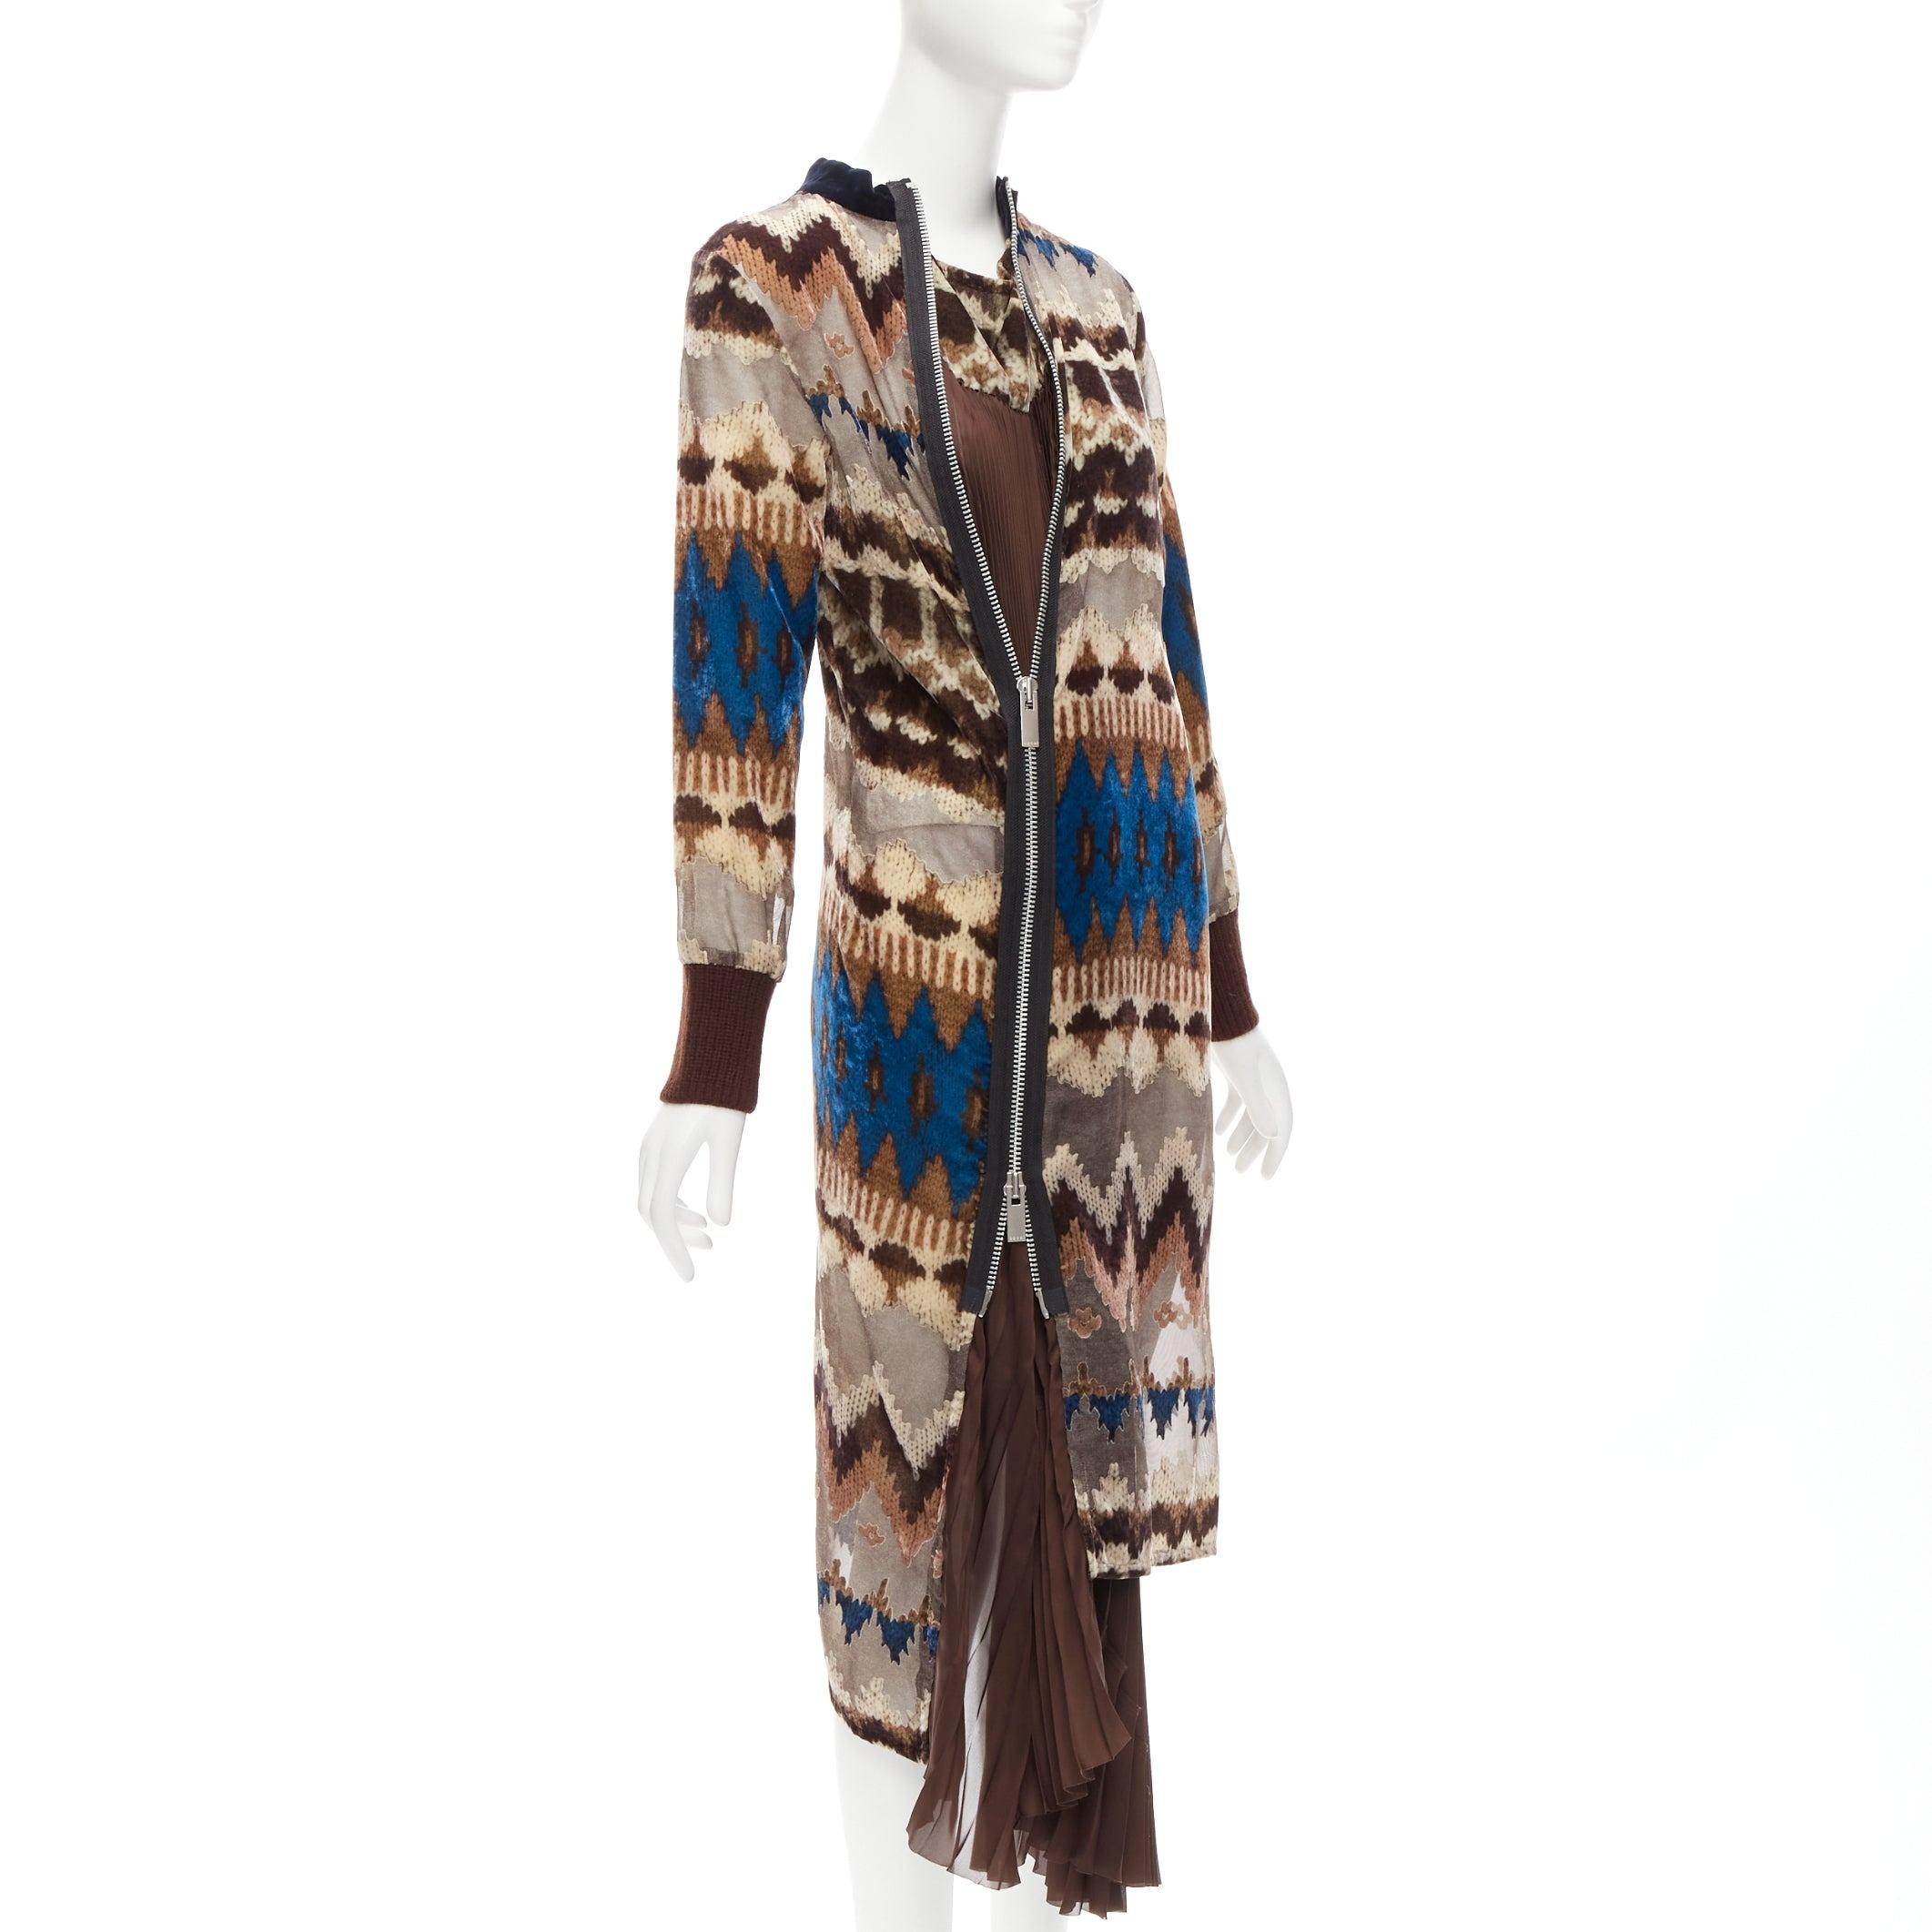 SACAI 2020 brown blue ethnic sheer devore zip pleat midi dress JP1 S
Reference: JACG/A00134
Brand: Sacai
Designer: Chitose Abe
Collection: 2020
Material: Rayon, Blend
Color: Brown, Blue
Pattern: Ethnic
Closure: Zip
Lining: Brown Fabric
Extra